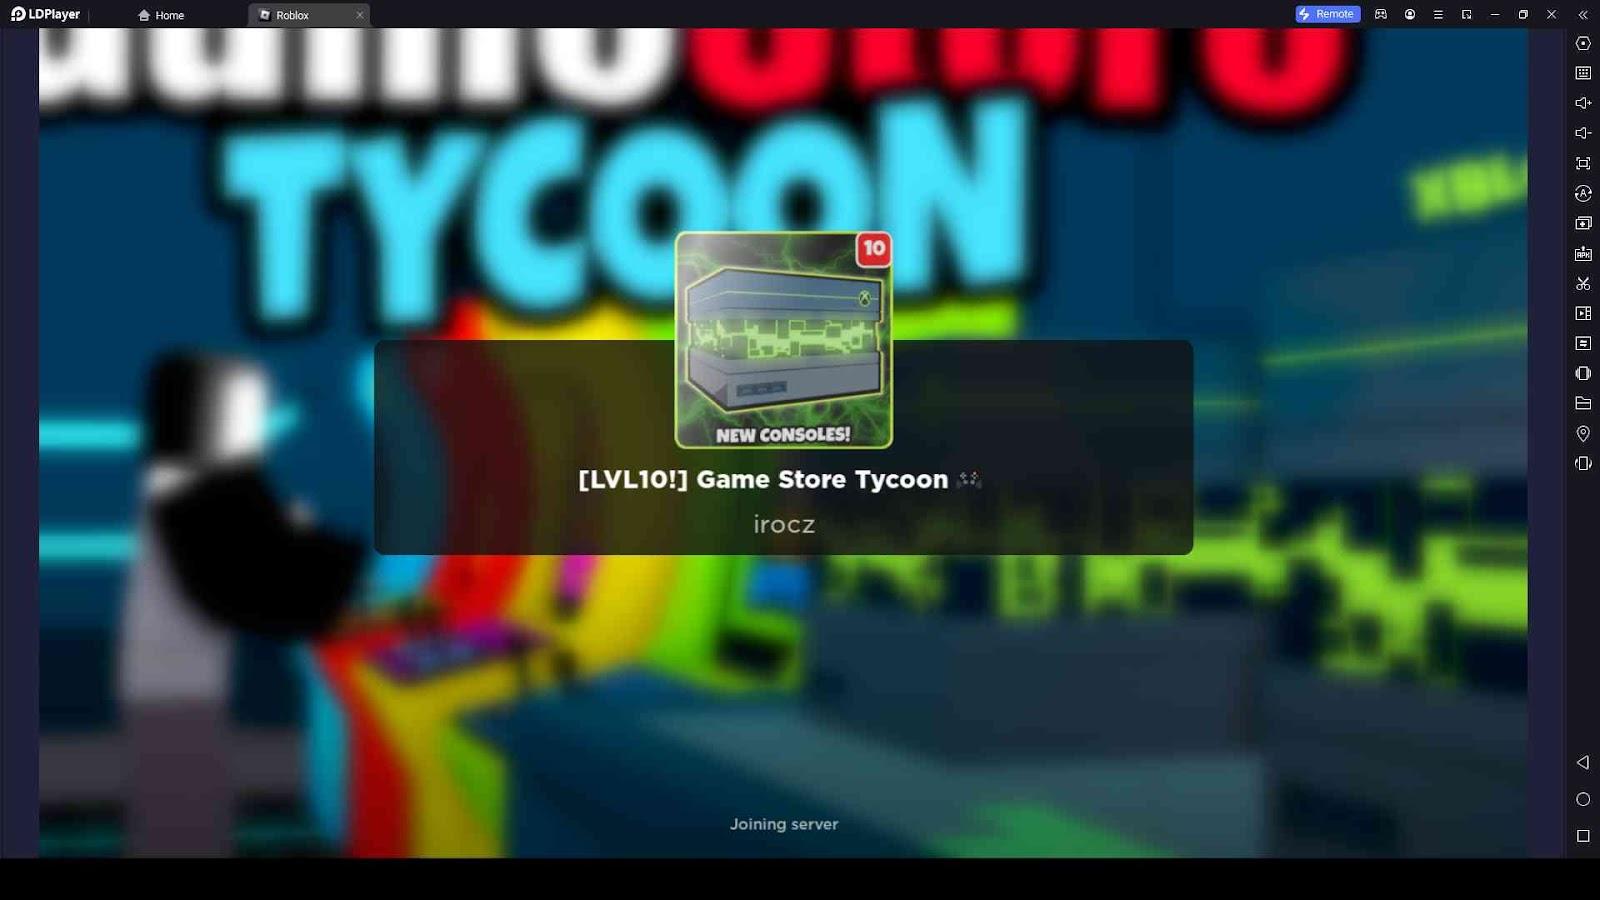 I made a tycoon game on ROBLOX about starting a COMPANY! (Do you